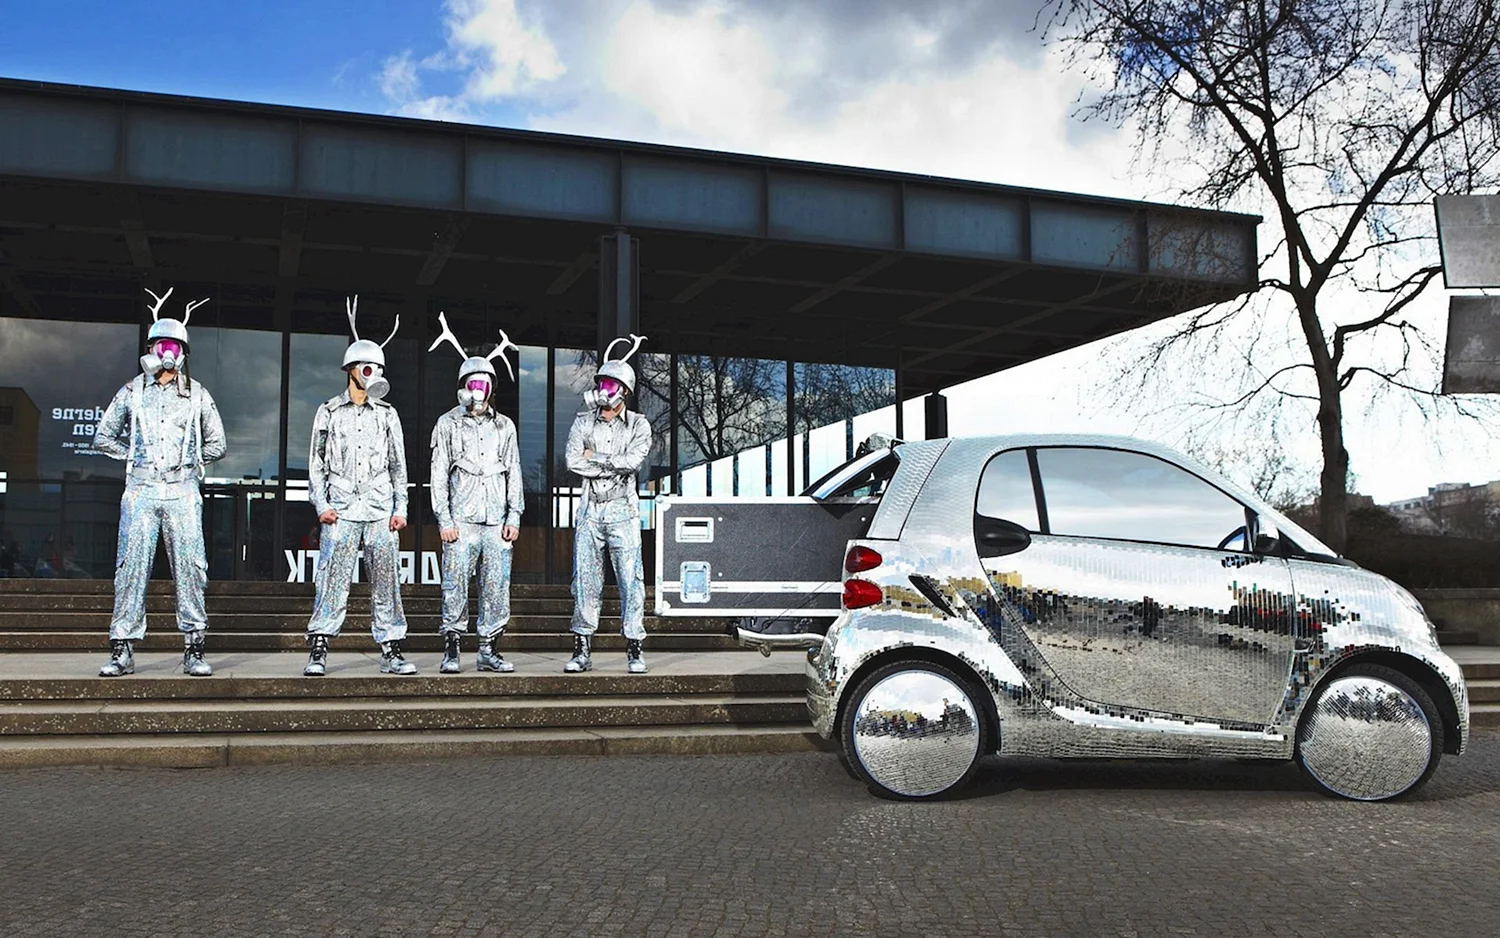 Smart Fortwo discoball